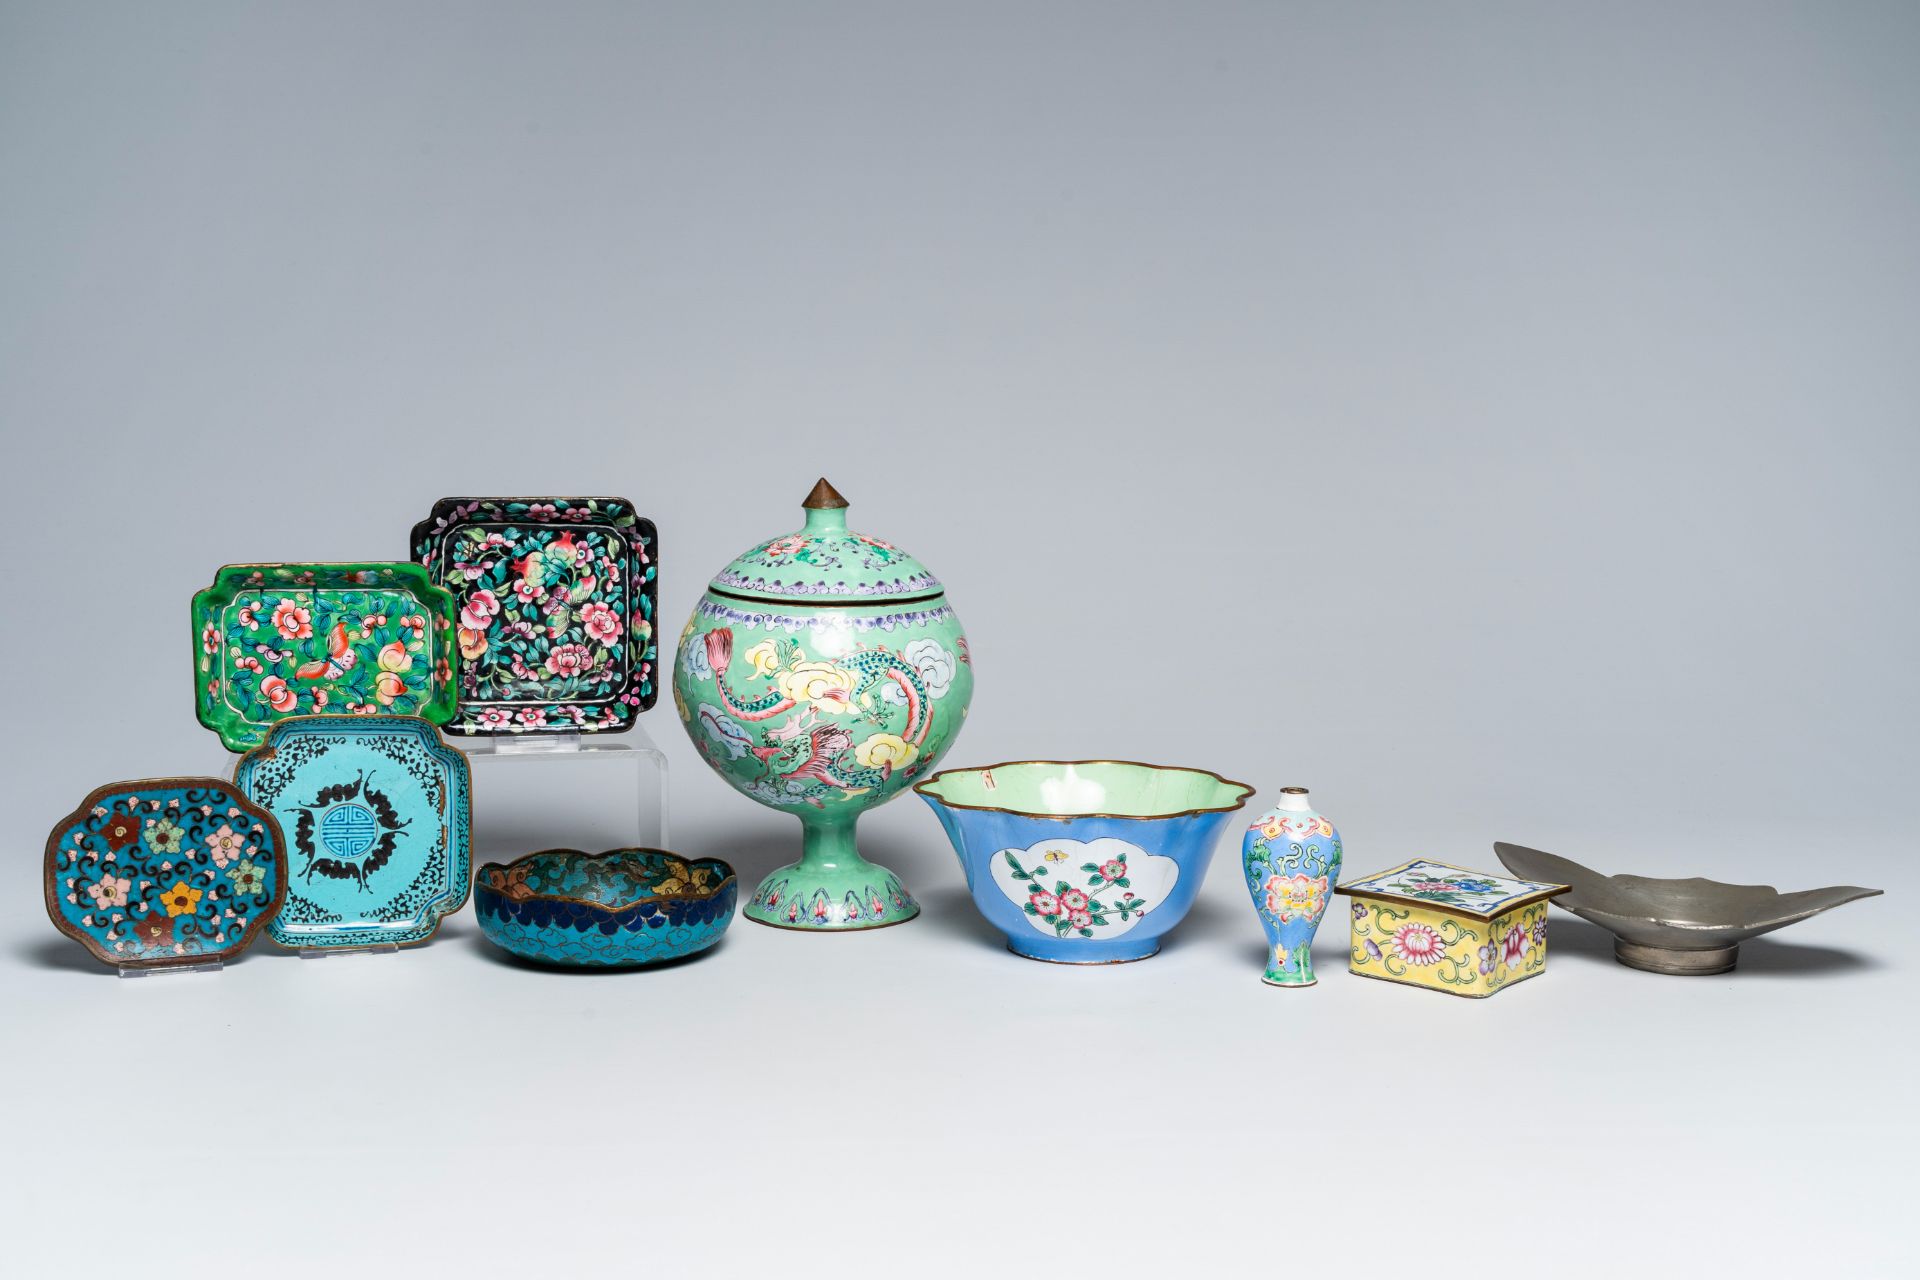 A varied collection of Chinese cloisonnÃ© items and a pewter saucer, 20th C.